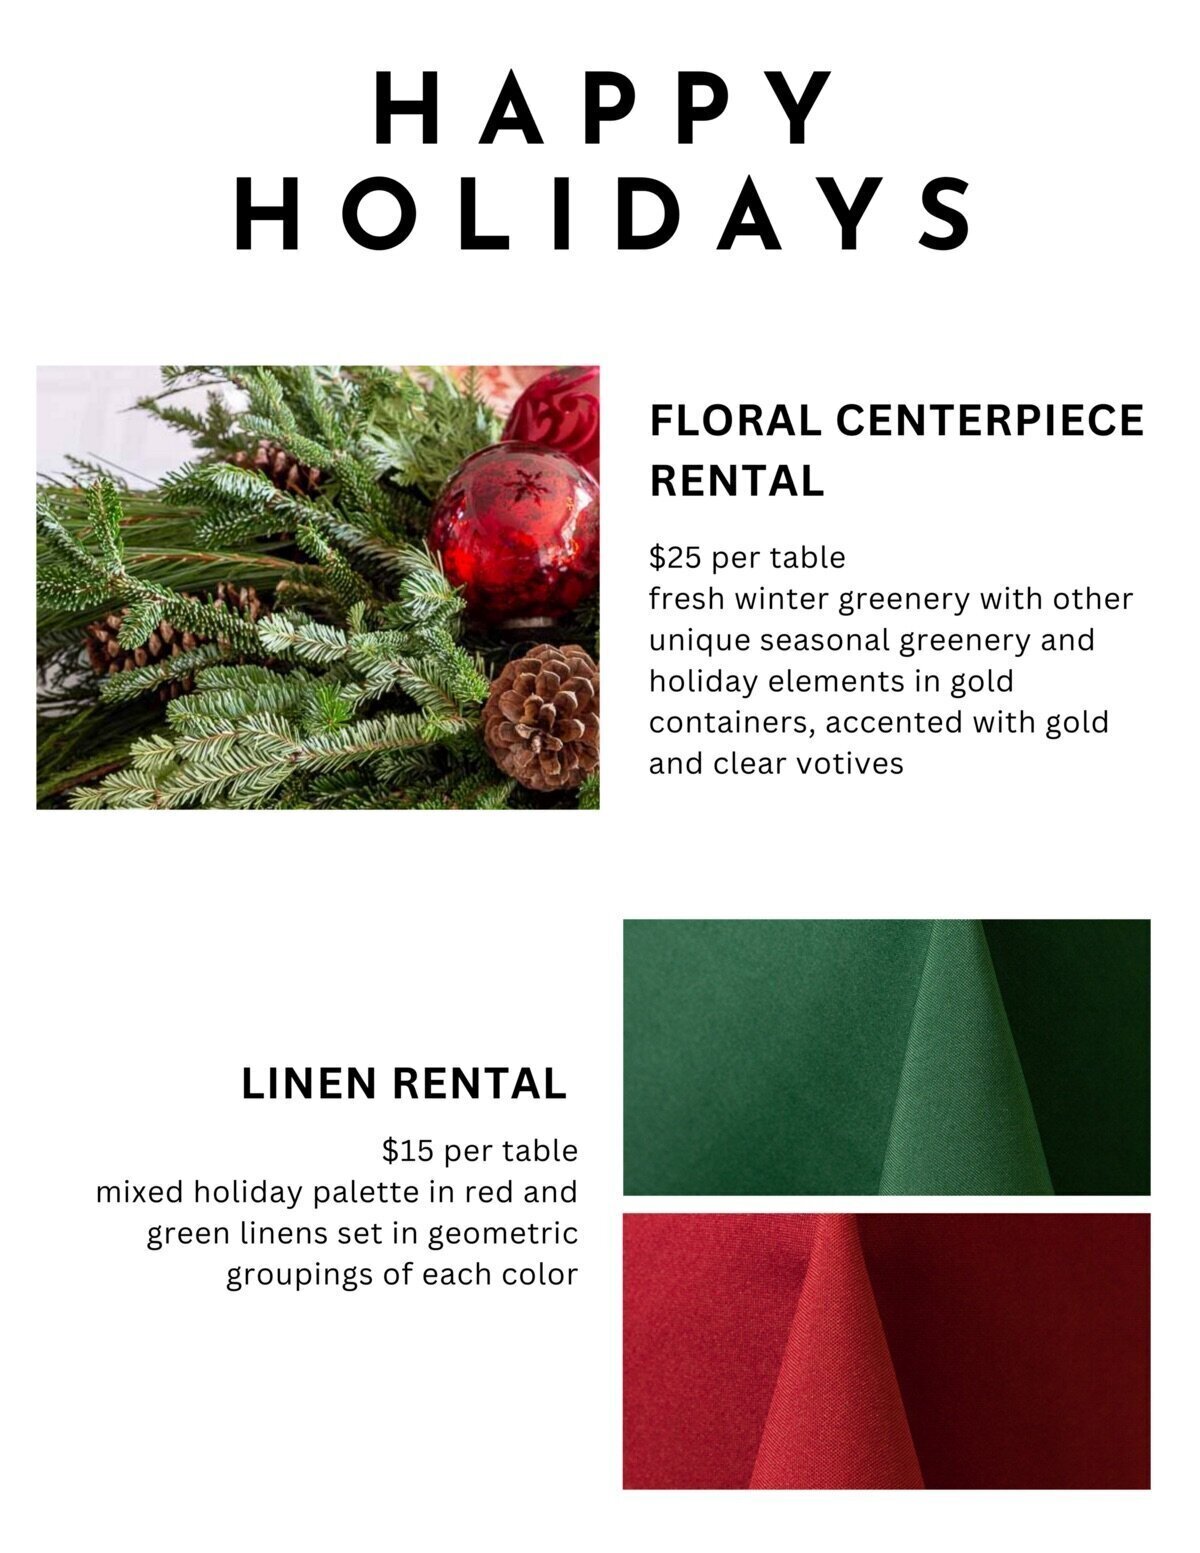 Market Catering Holiday Decor Rental